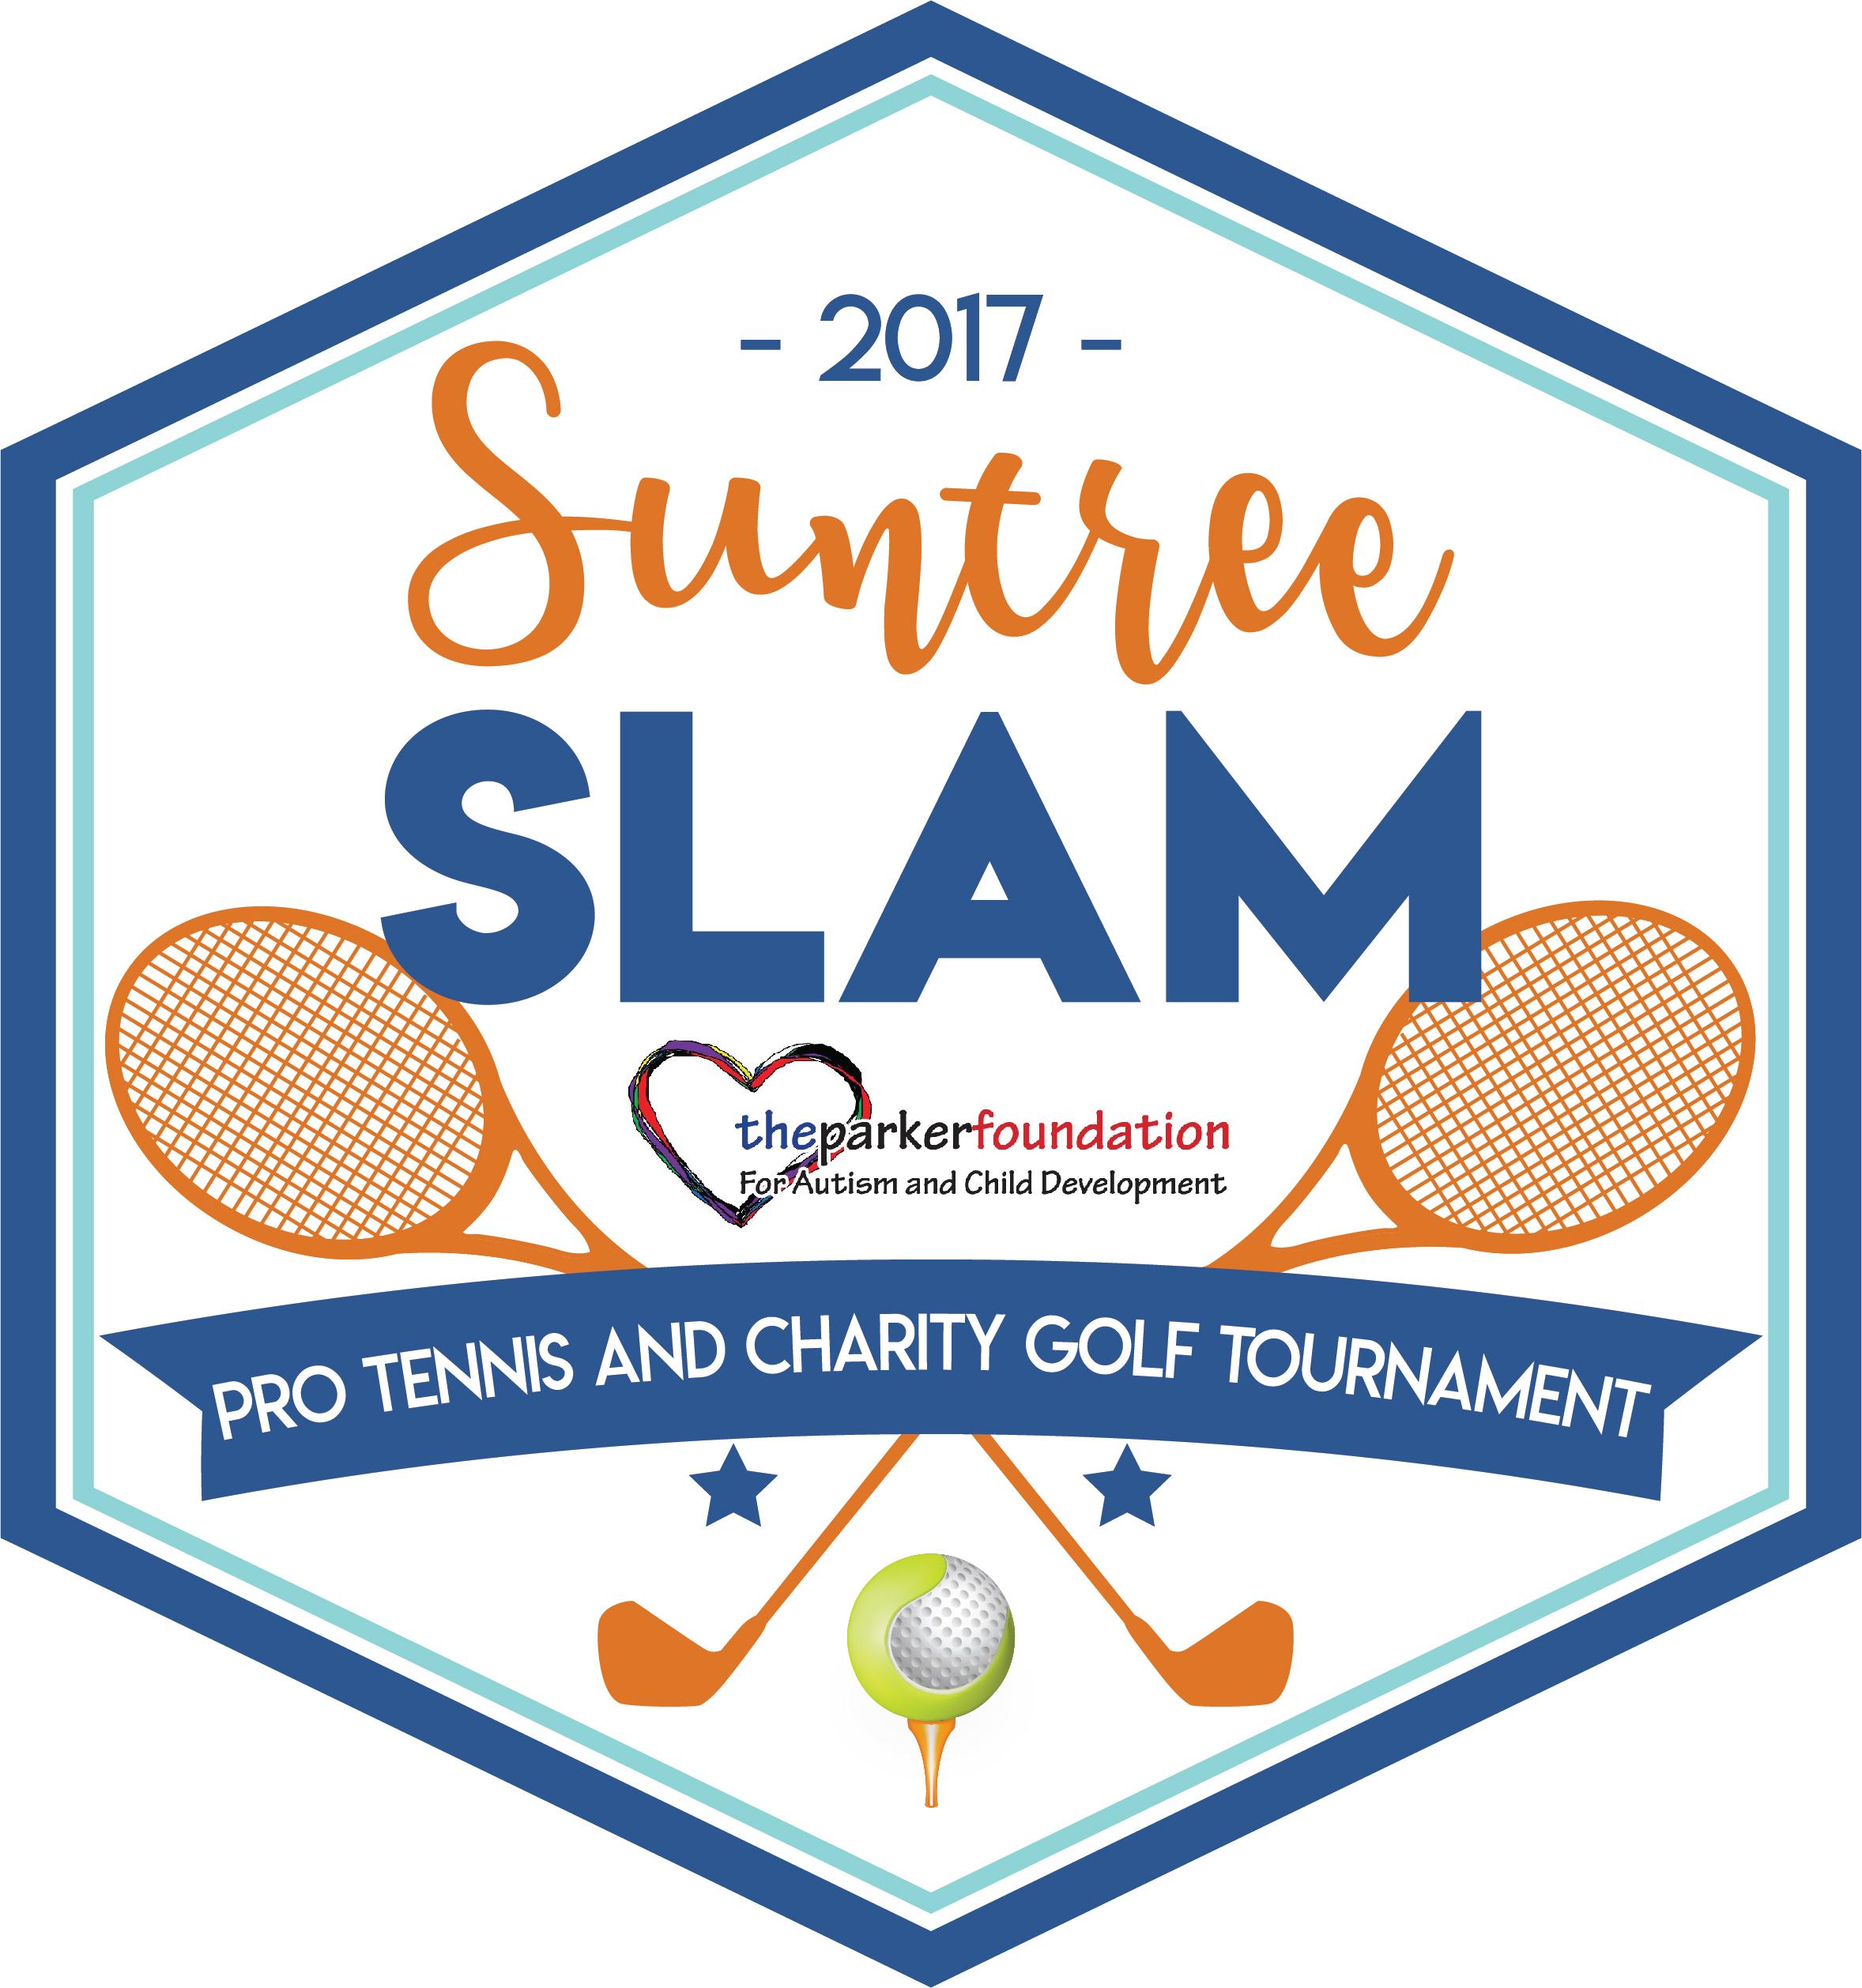 7th Annual Suntree Slam Prize Money Doubles and Charity Golf + Halloween Party